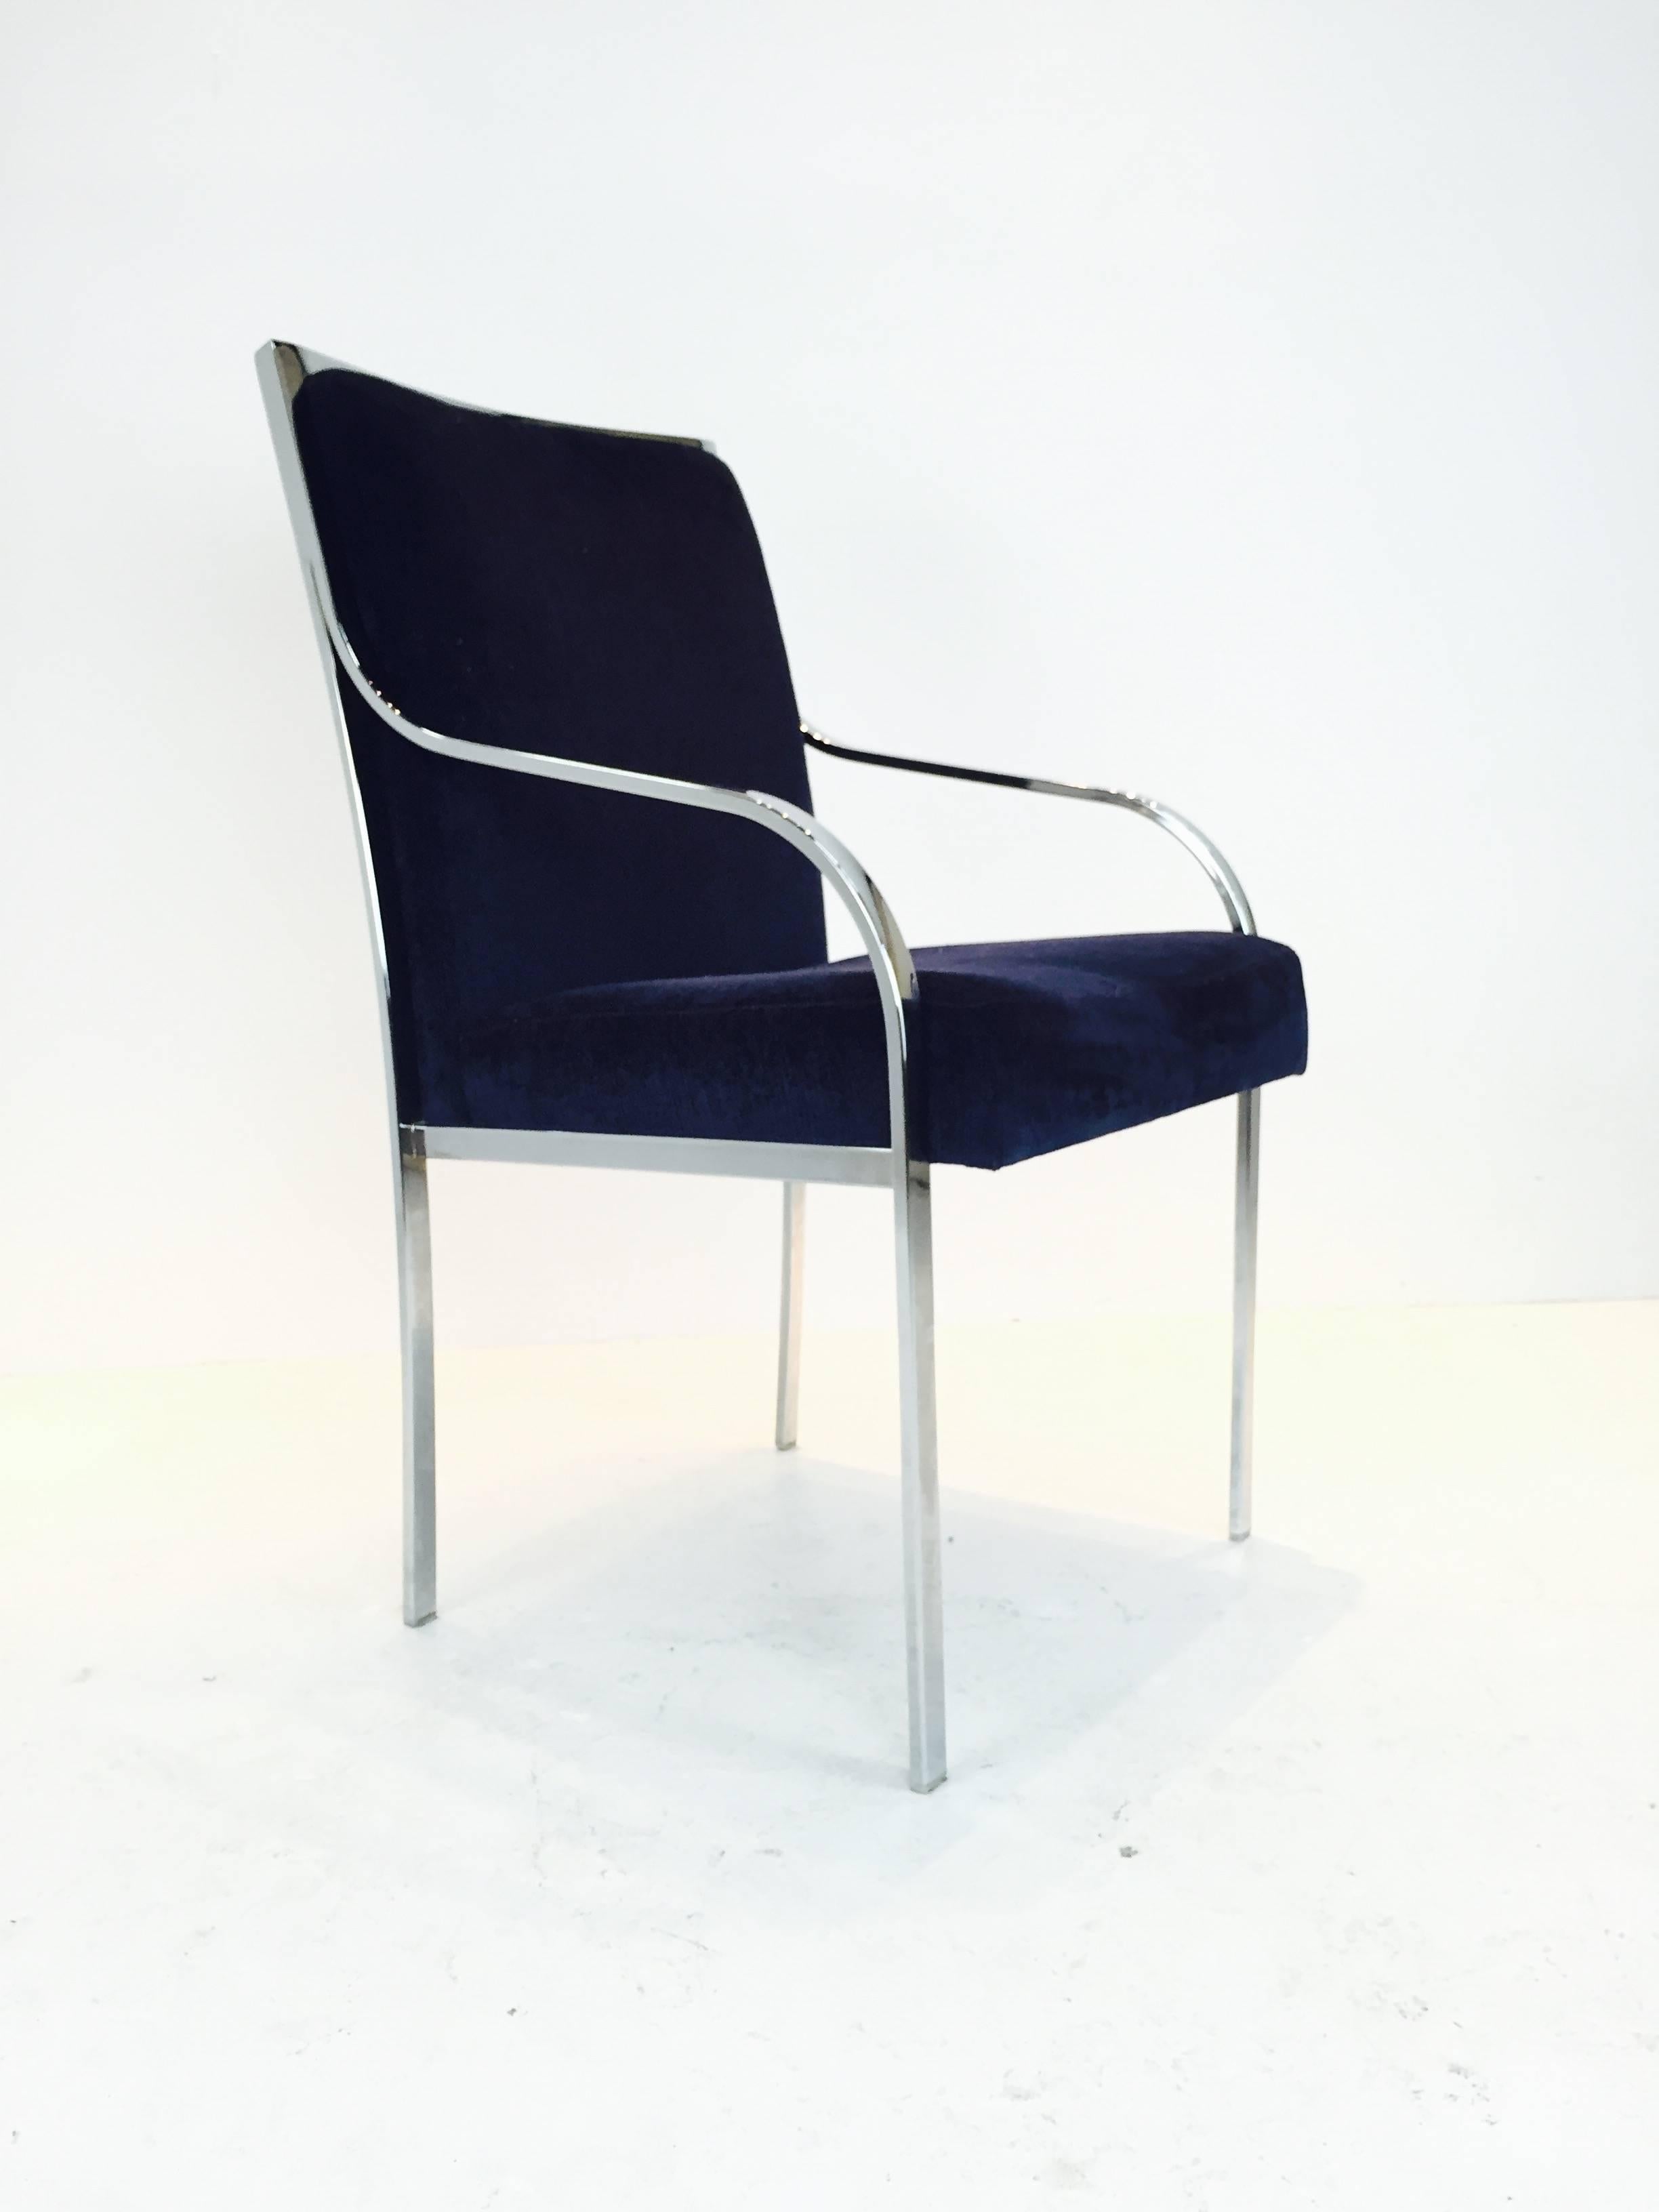 Set of six Pierre Cardin dining chairs in the style of Milo Baughman. These chrome chairs with navy upholstery are in good vintage condition.

Dimensions: 20